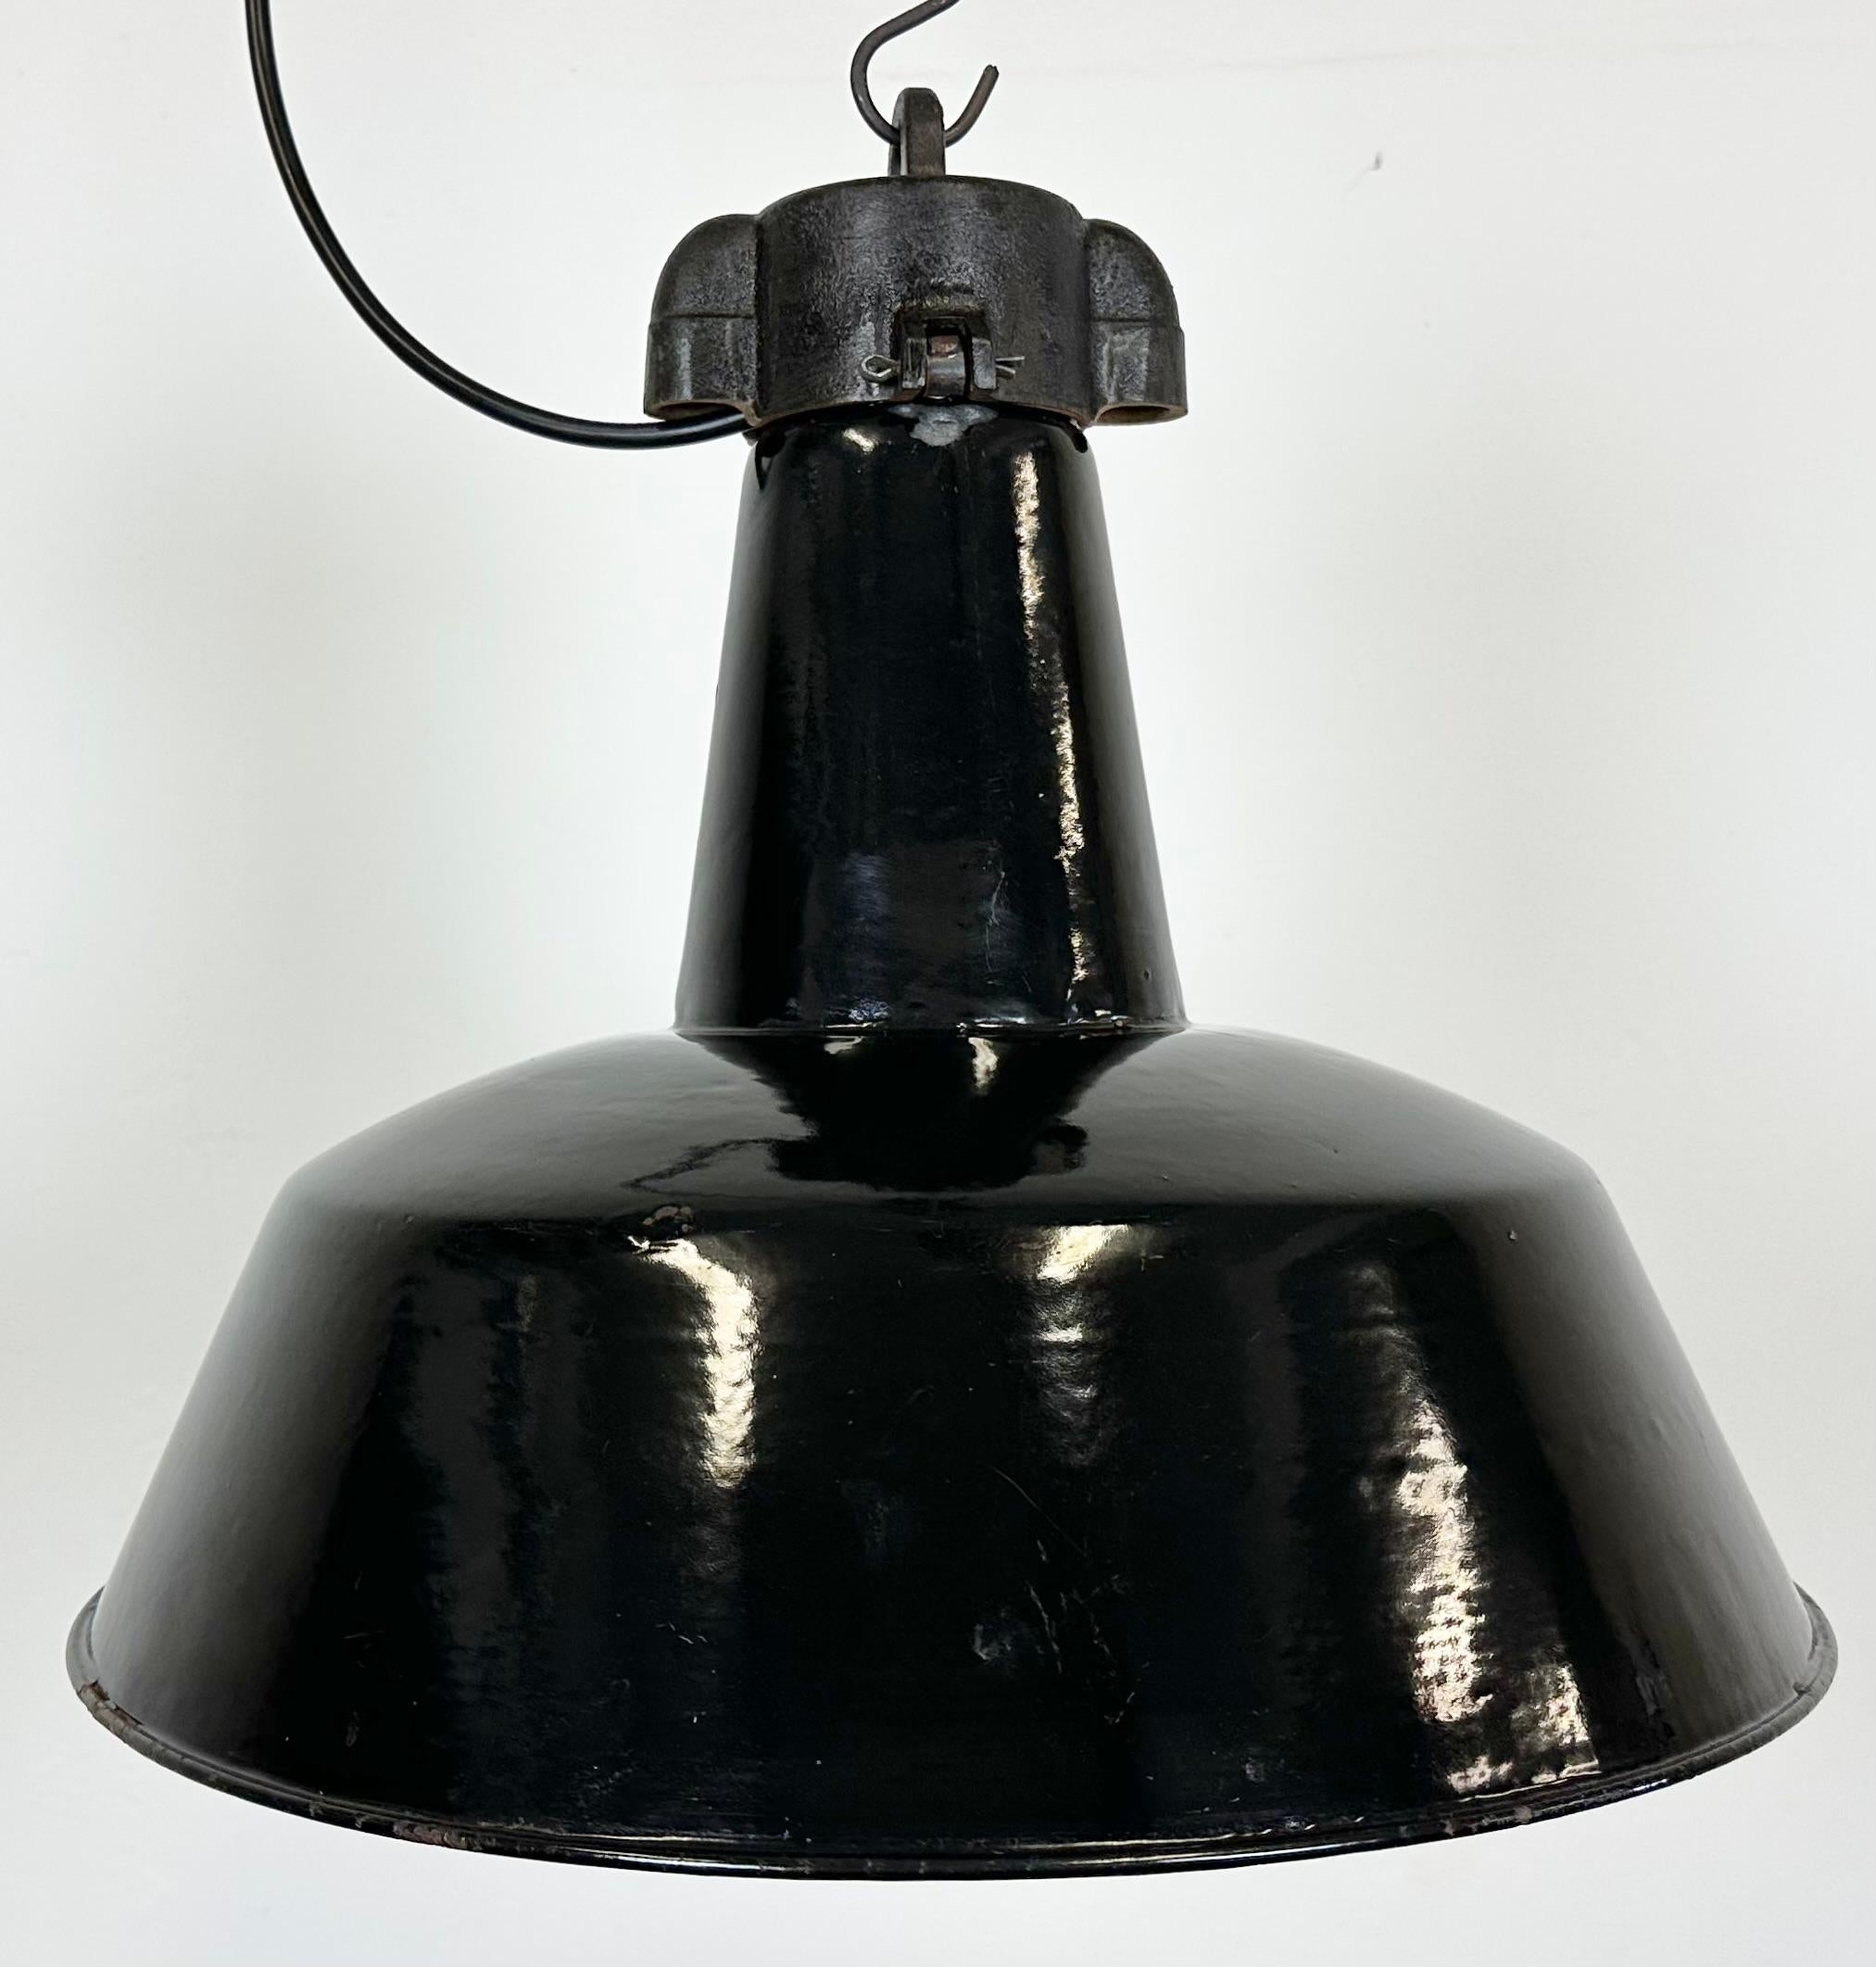 Czech Industrial Black Enamel Factory Lamp with Cast Iron Top, 1950s For Sale